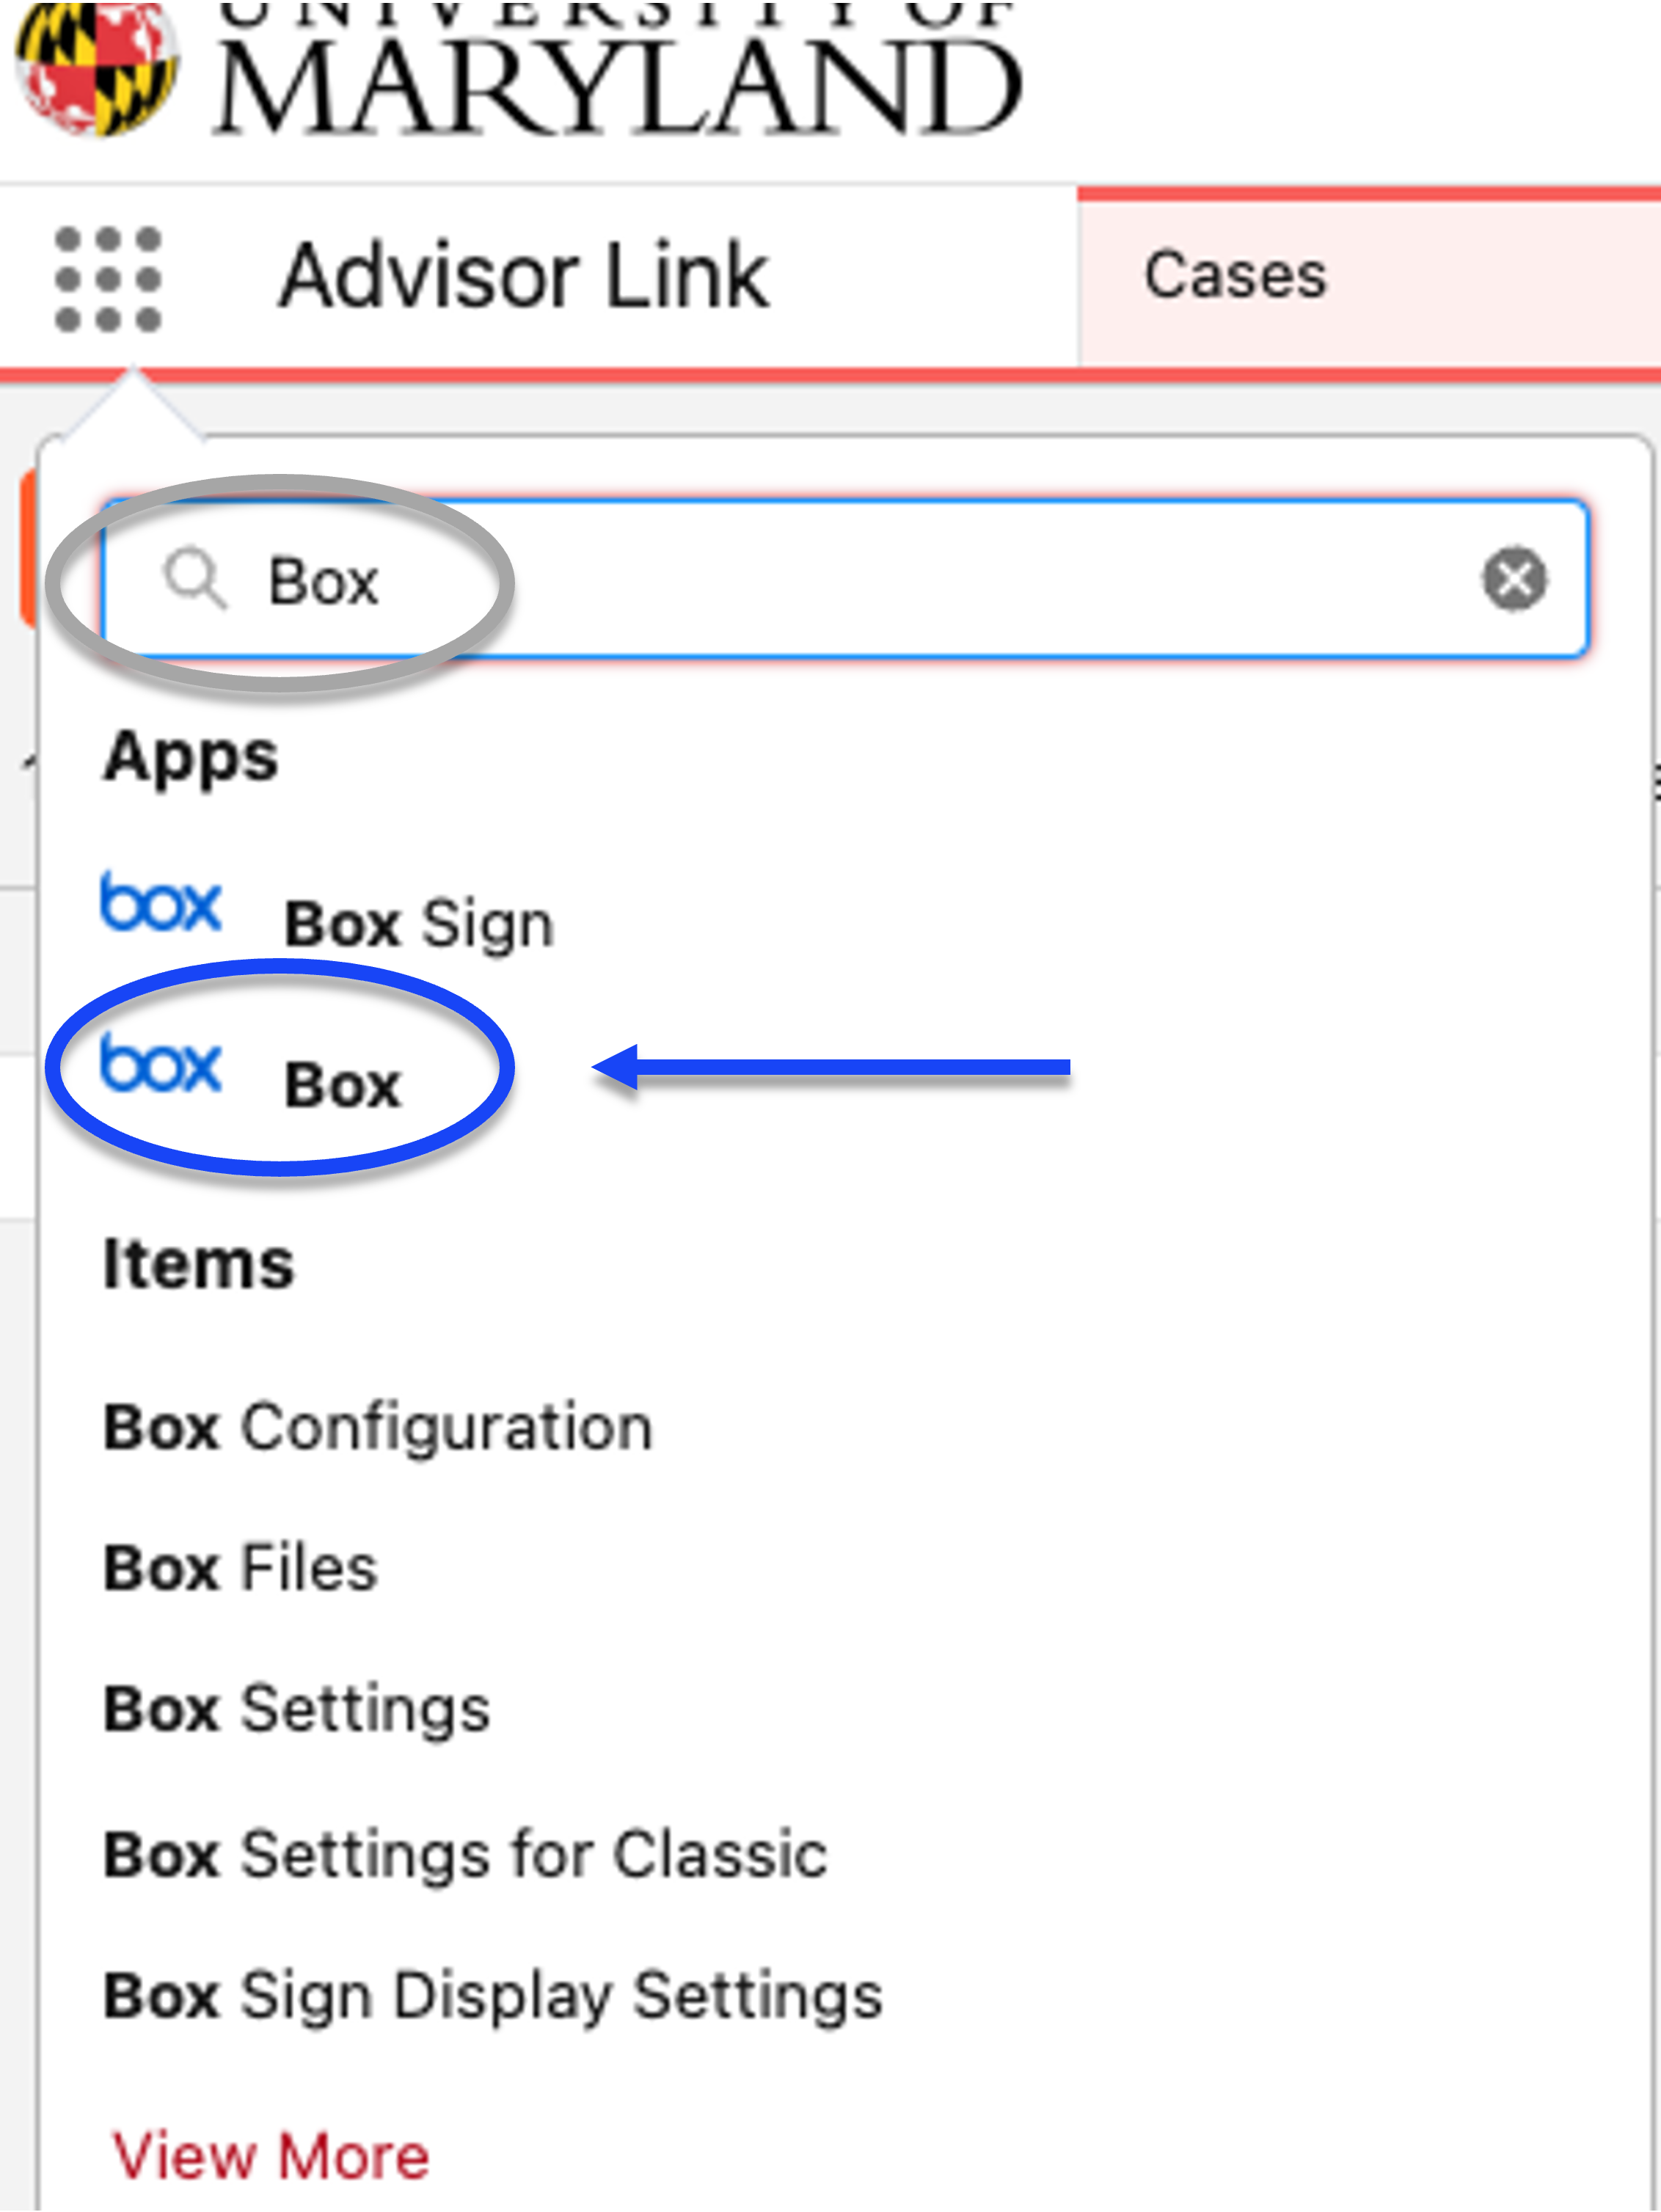 Search for the Box App